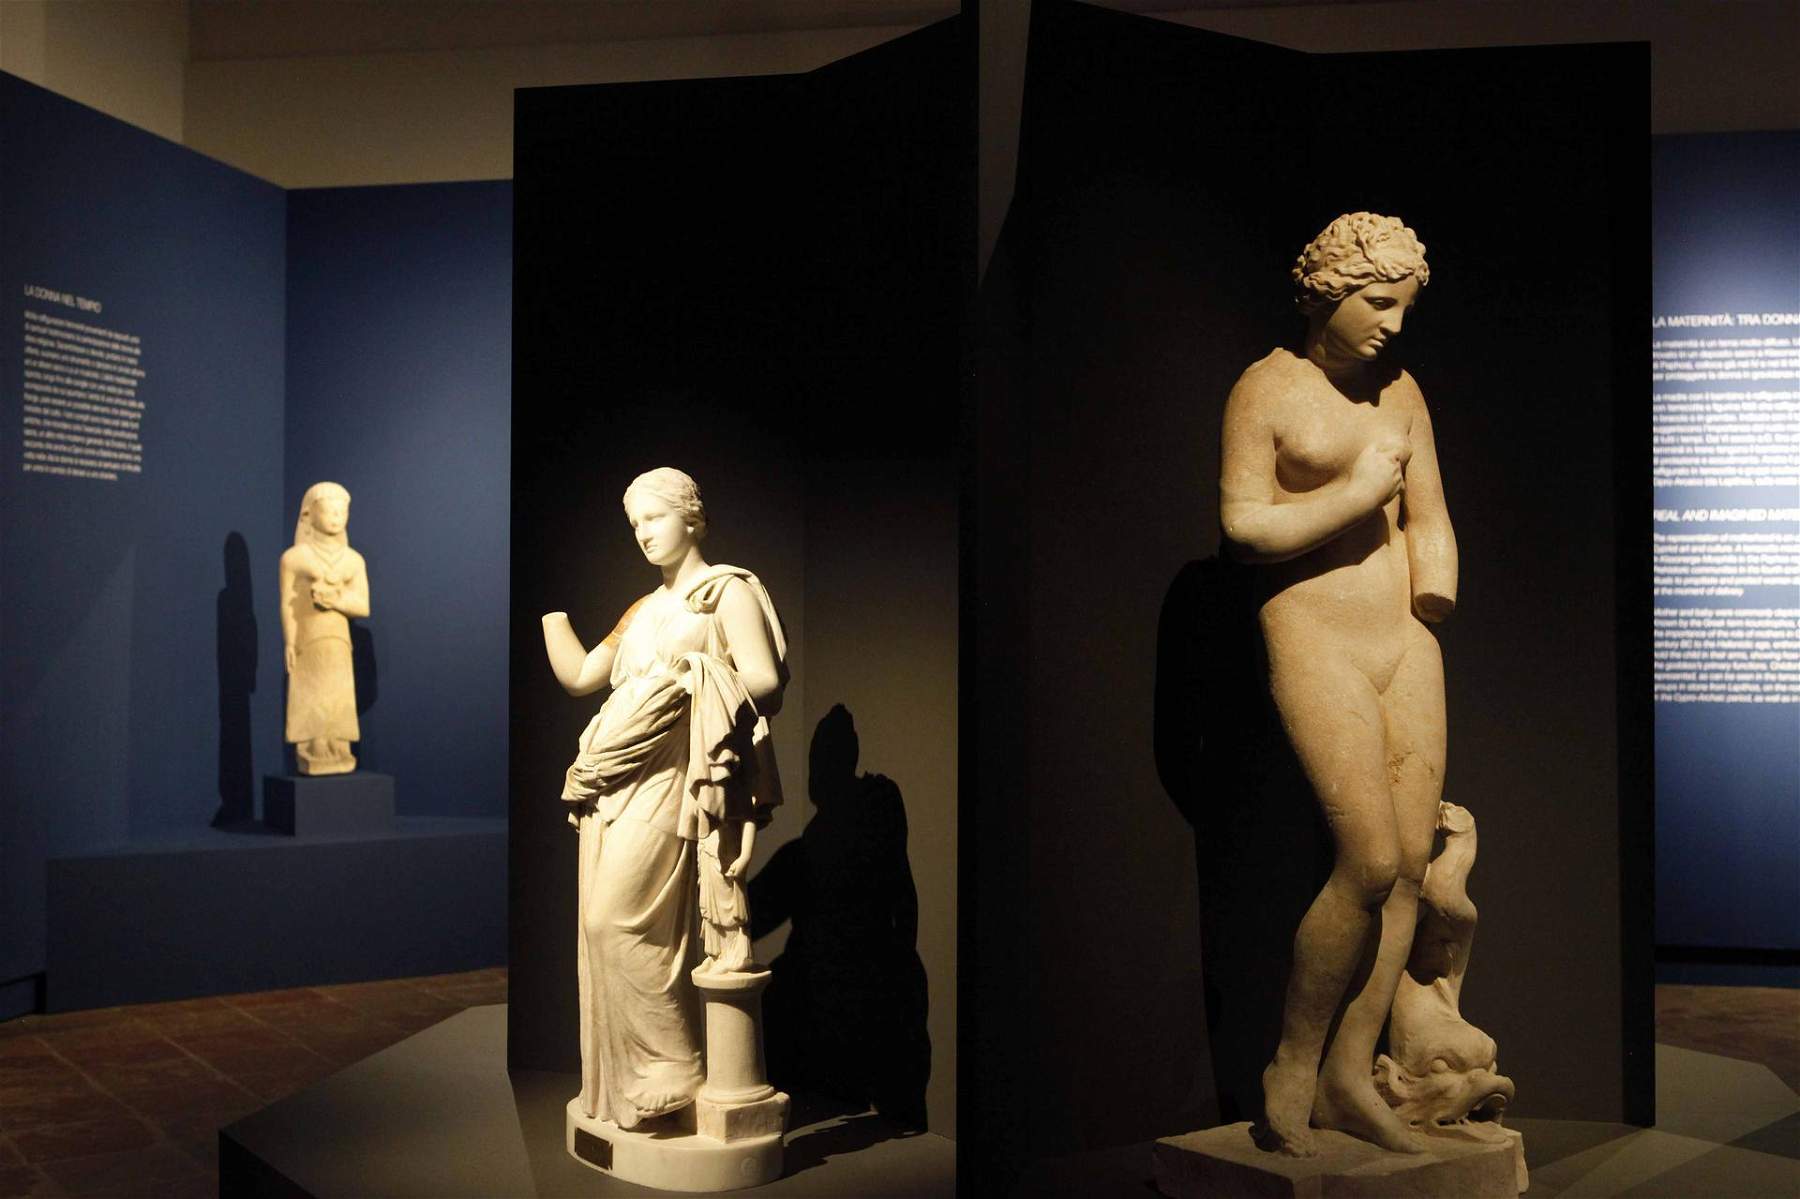 The thousand-year history of Cyprus is on display at the Royal Museums of Turin